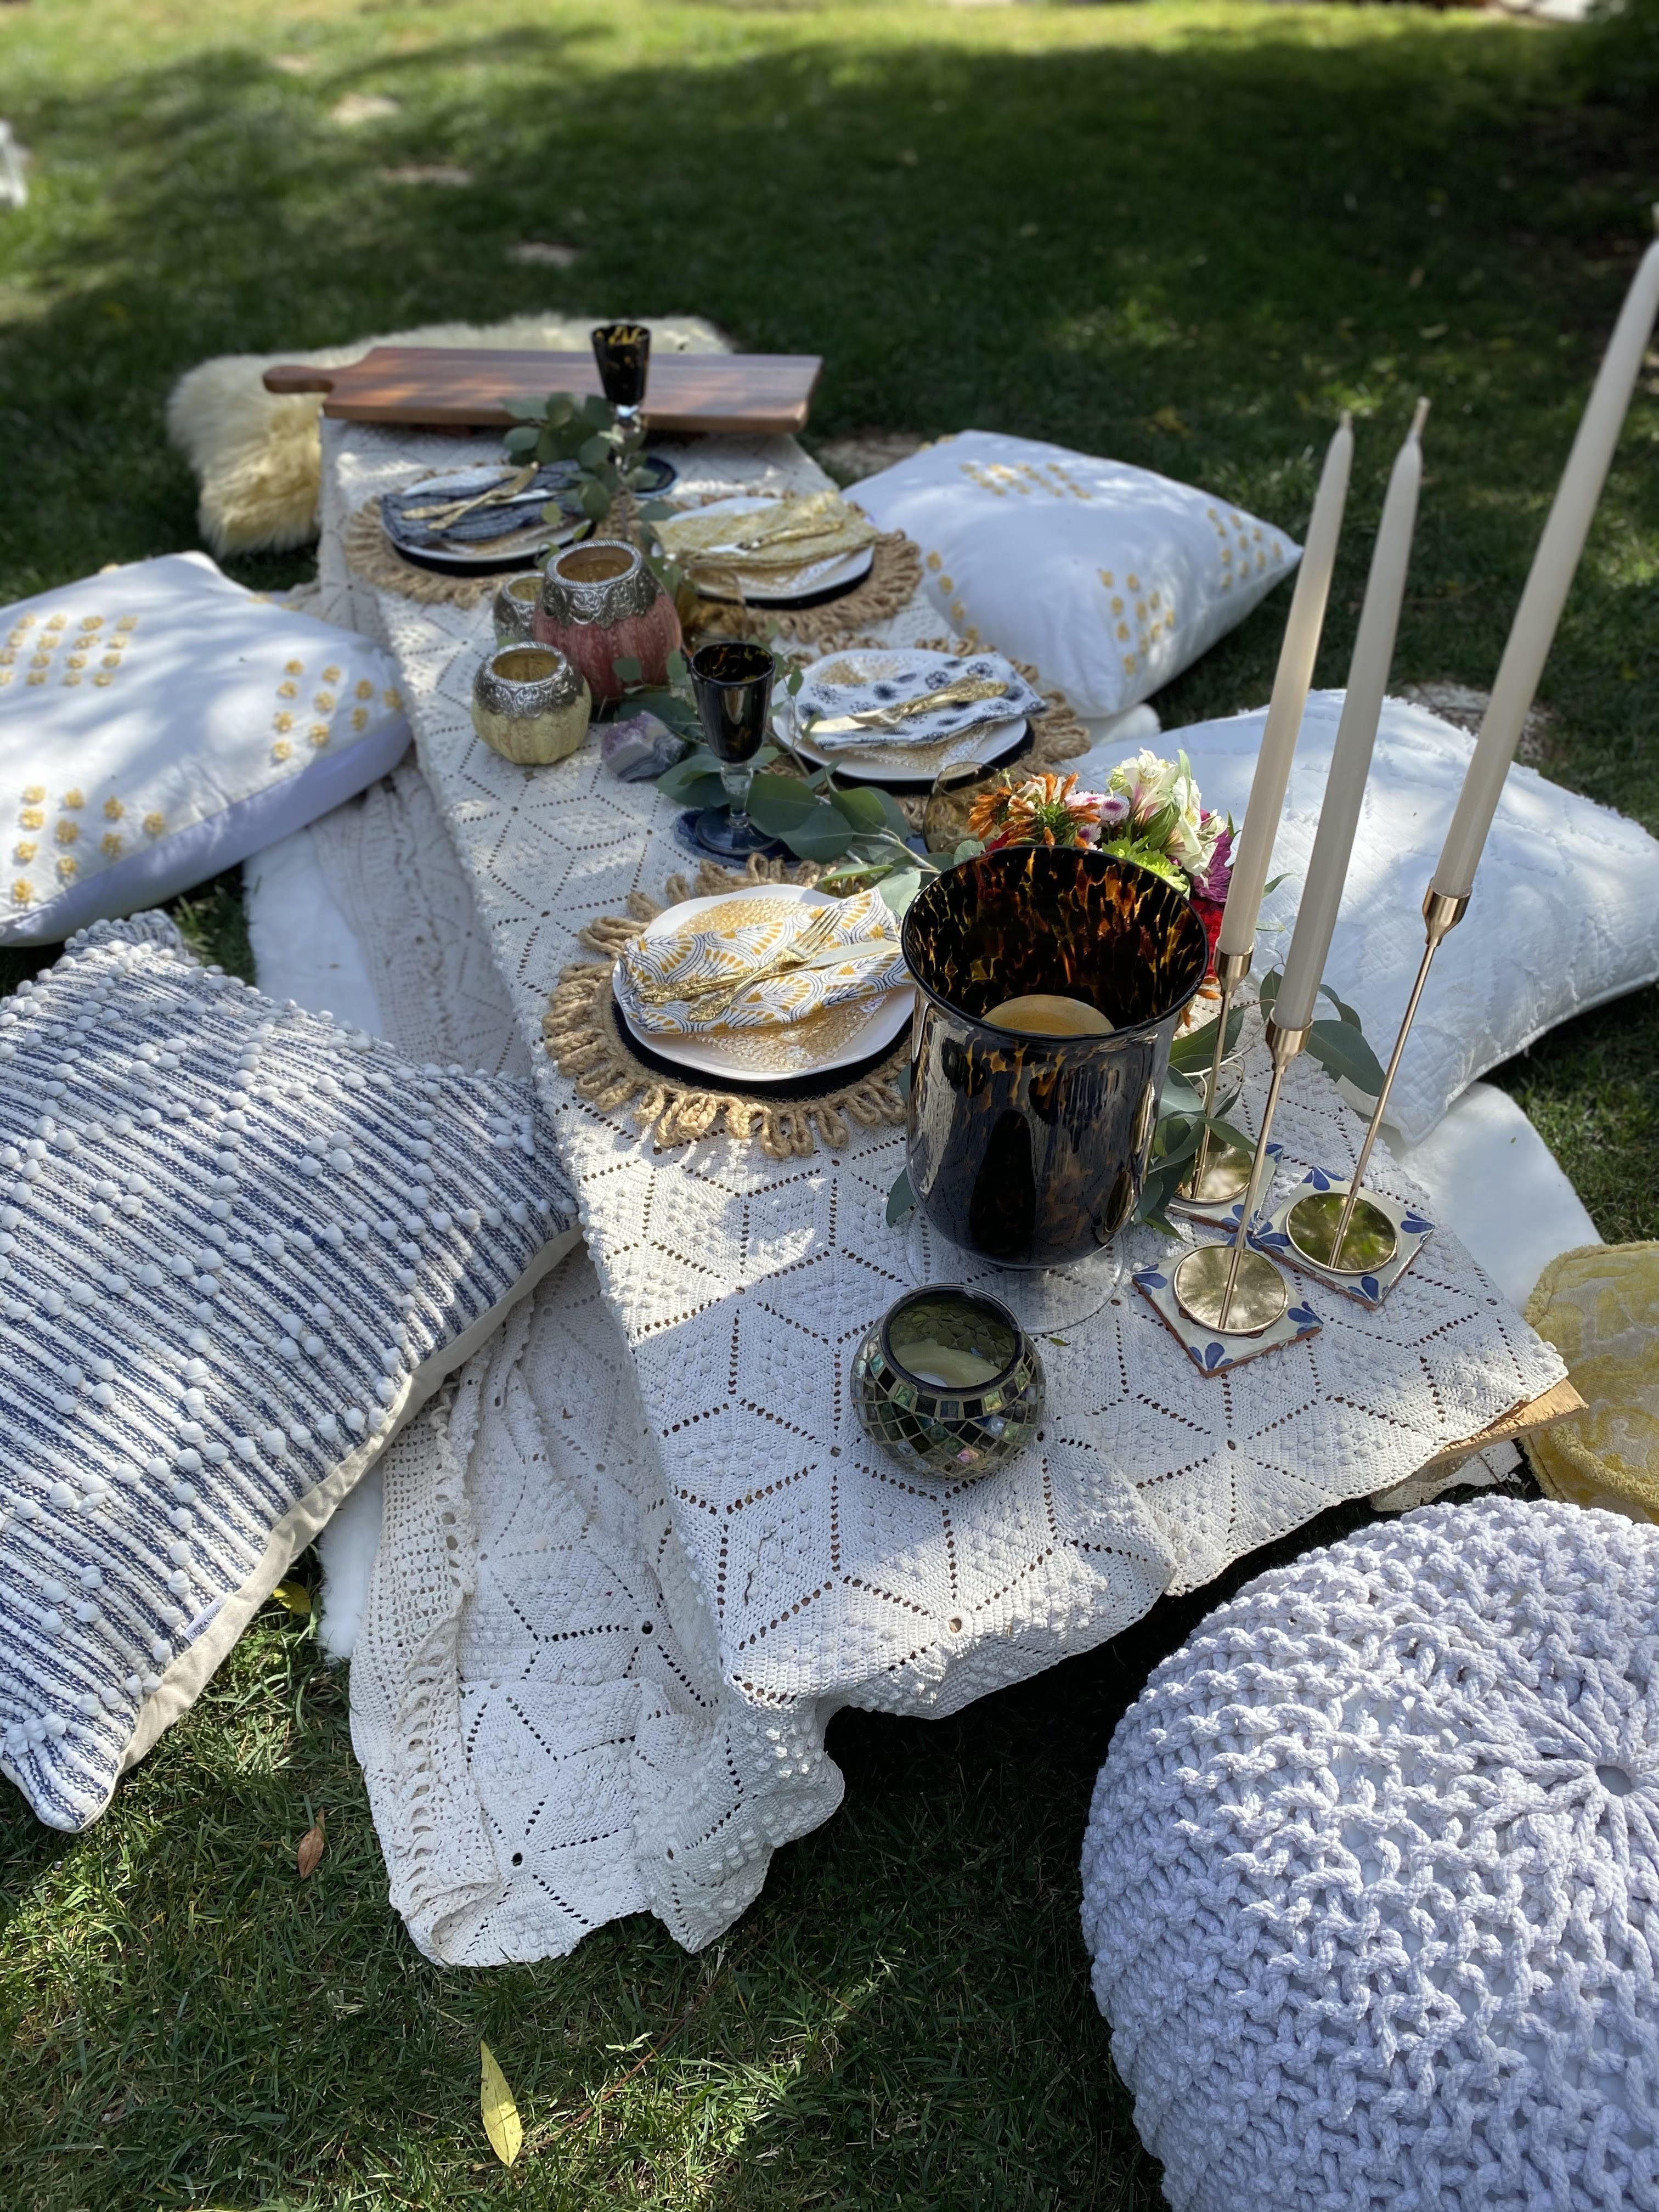 Outdoor low table spread for glamorous picnic or dinner